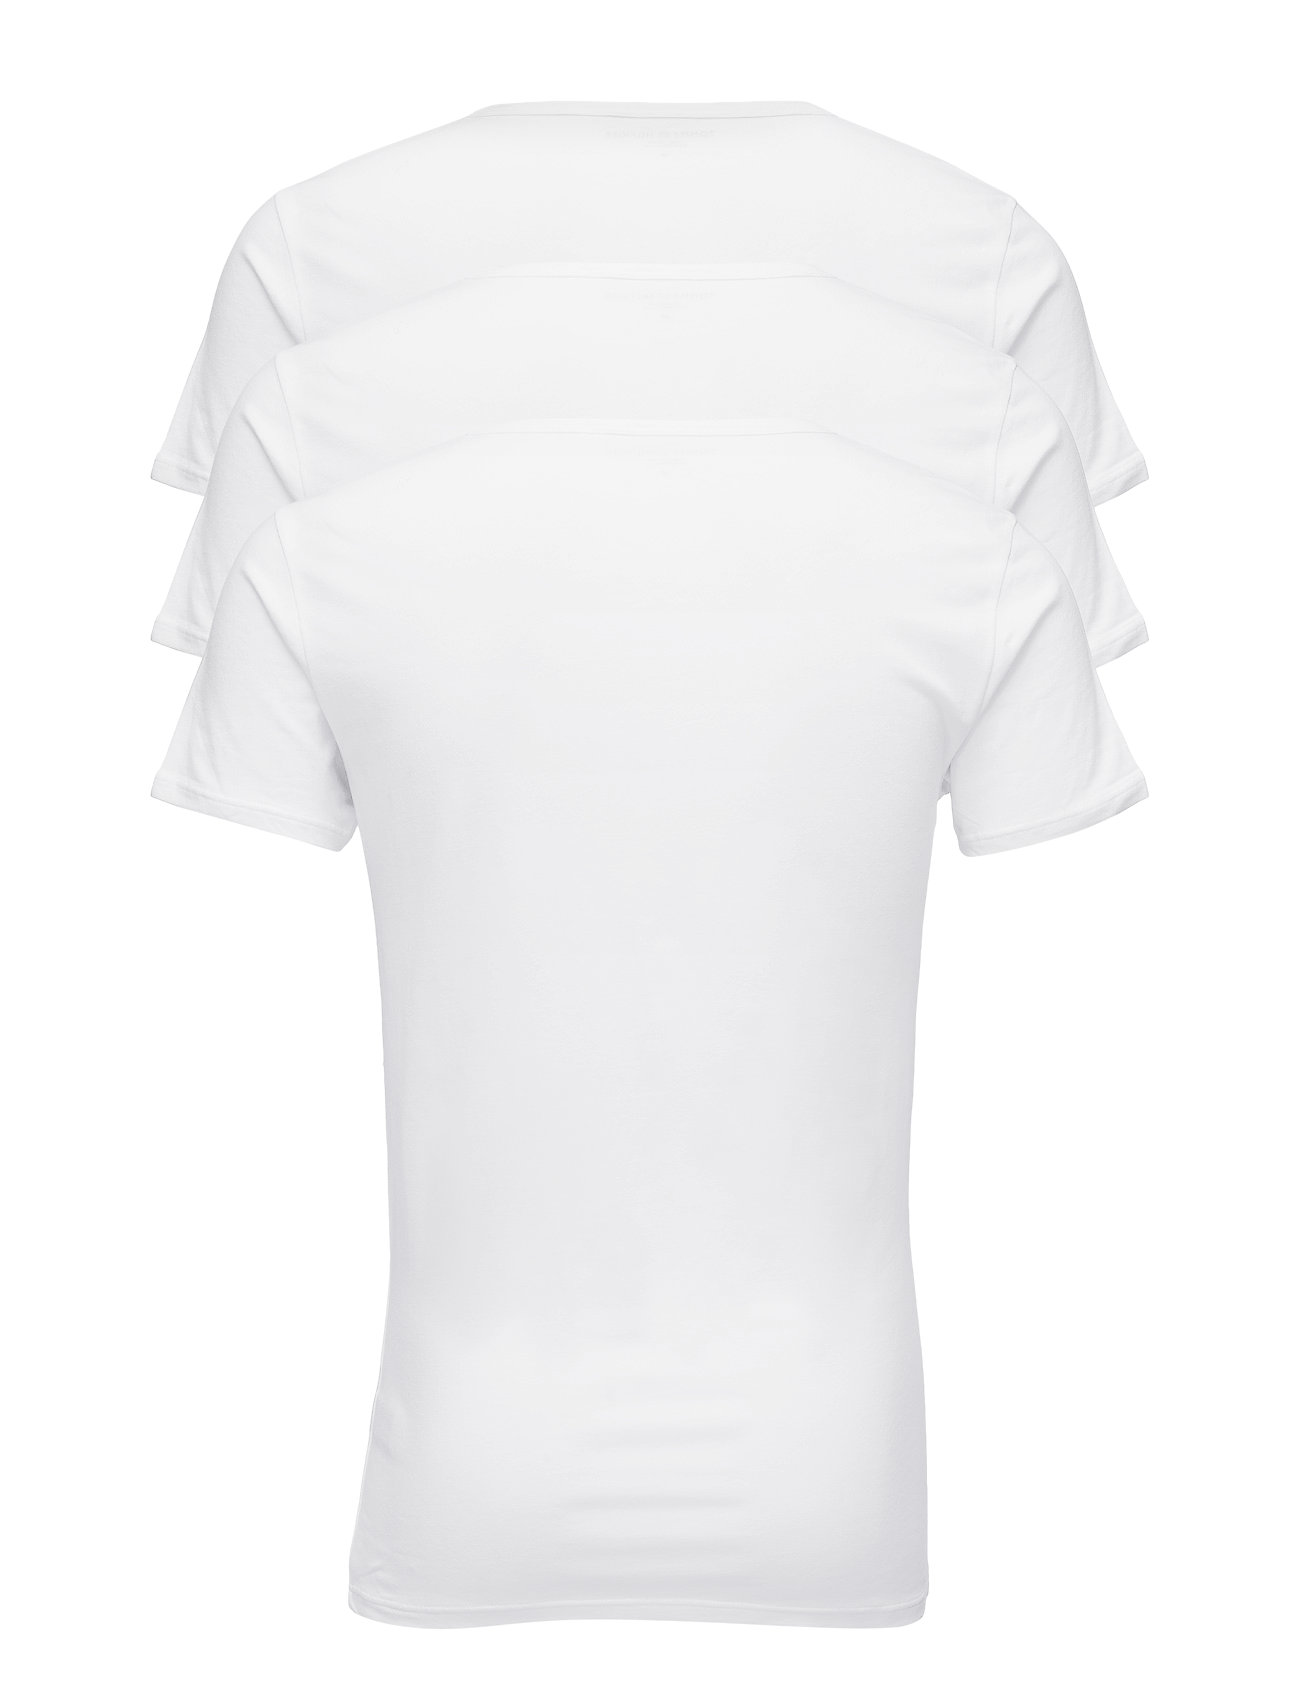 Tommy Hilfiger - STRETCH CN TEE SS 3PACK - white - 1